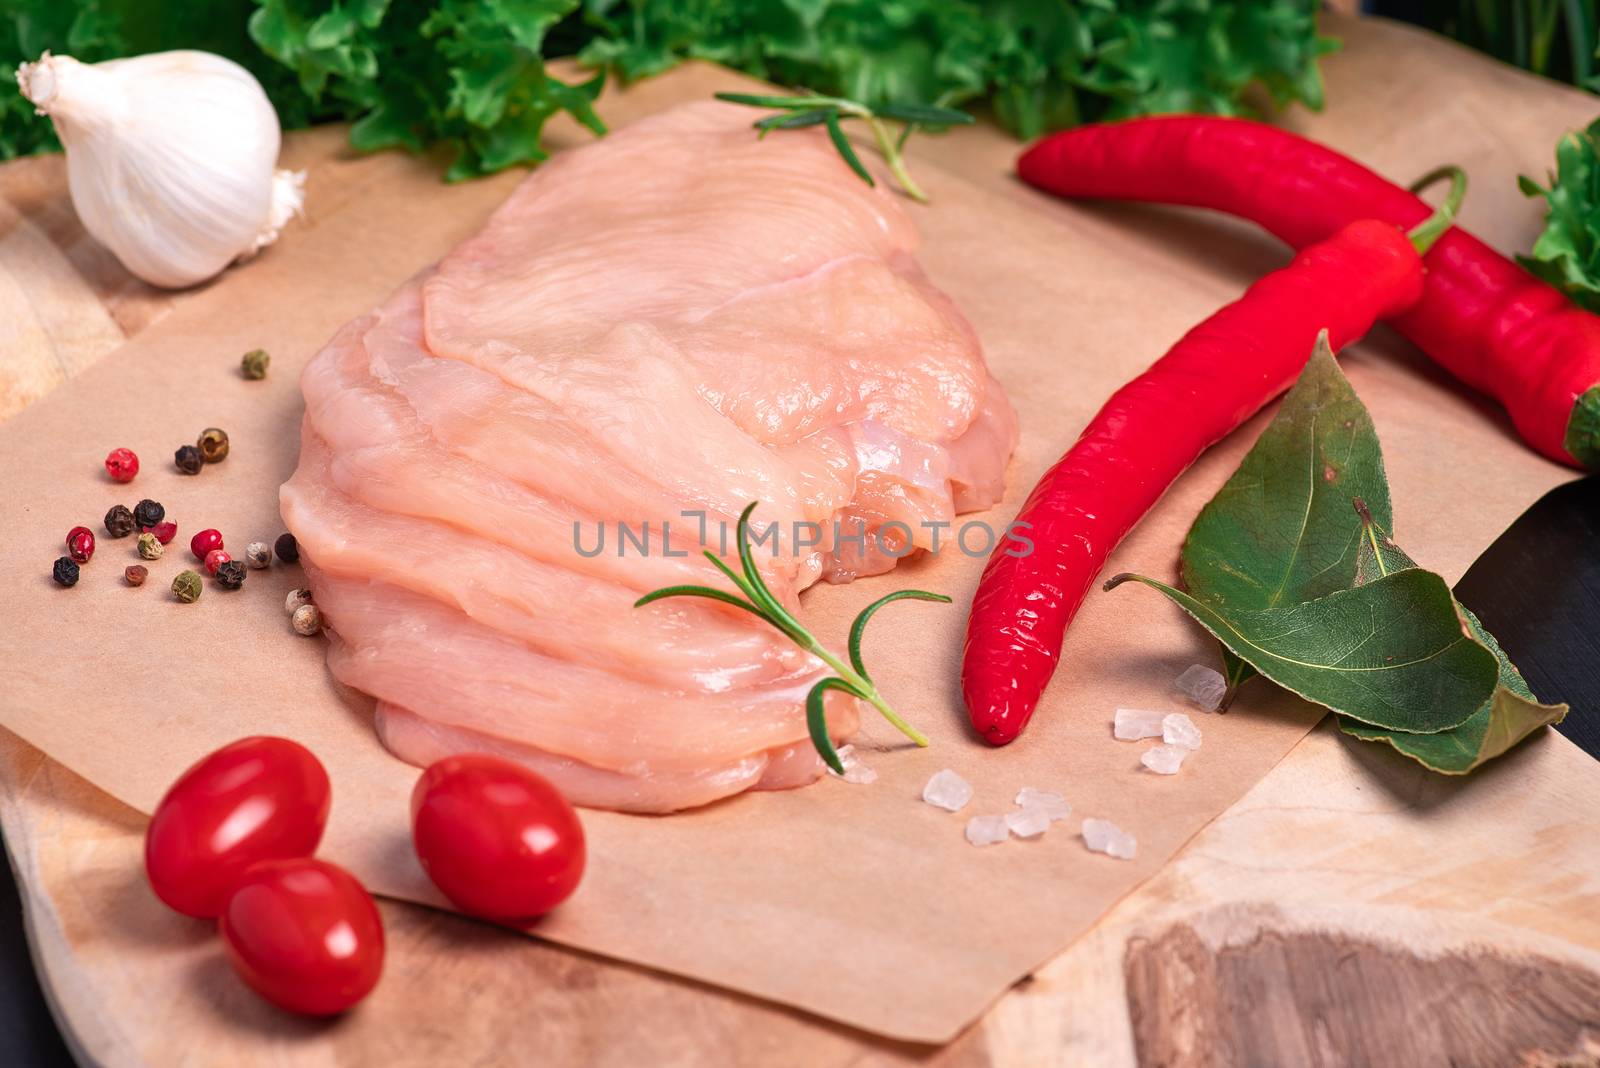 Raw sliced chicken meat close-up. Sotilissimo. Delicious dietary meat. Cooking,food of meat and fillets.Close-up view of raw, fresh, choped and sliced chicken meat.Top view.